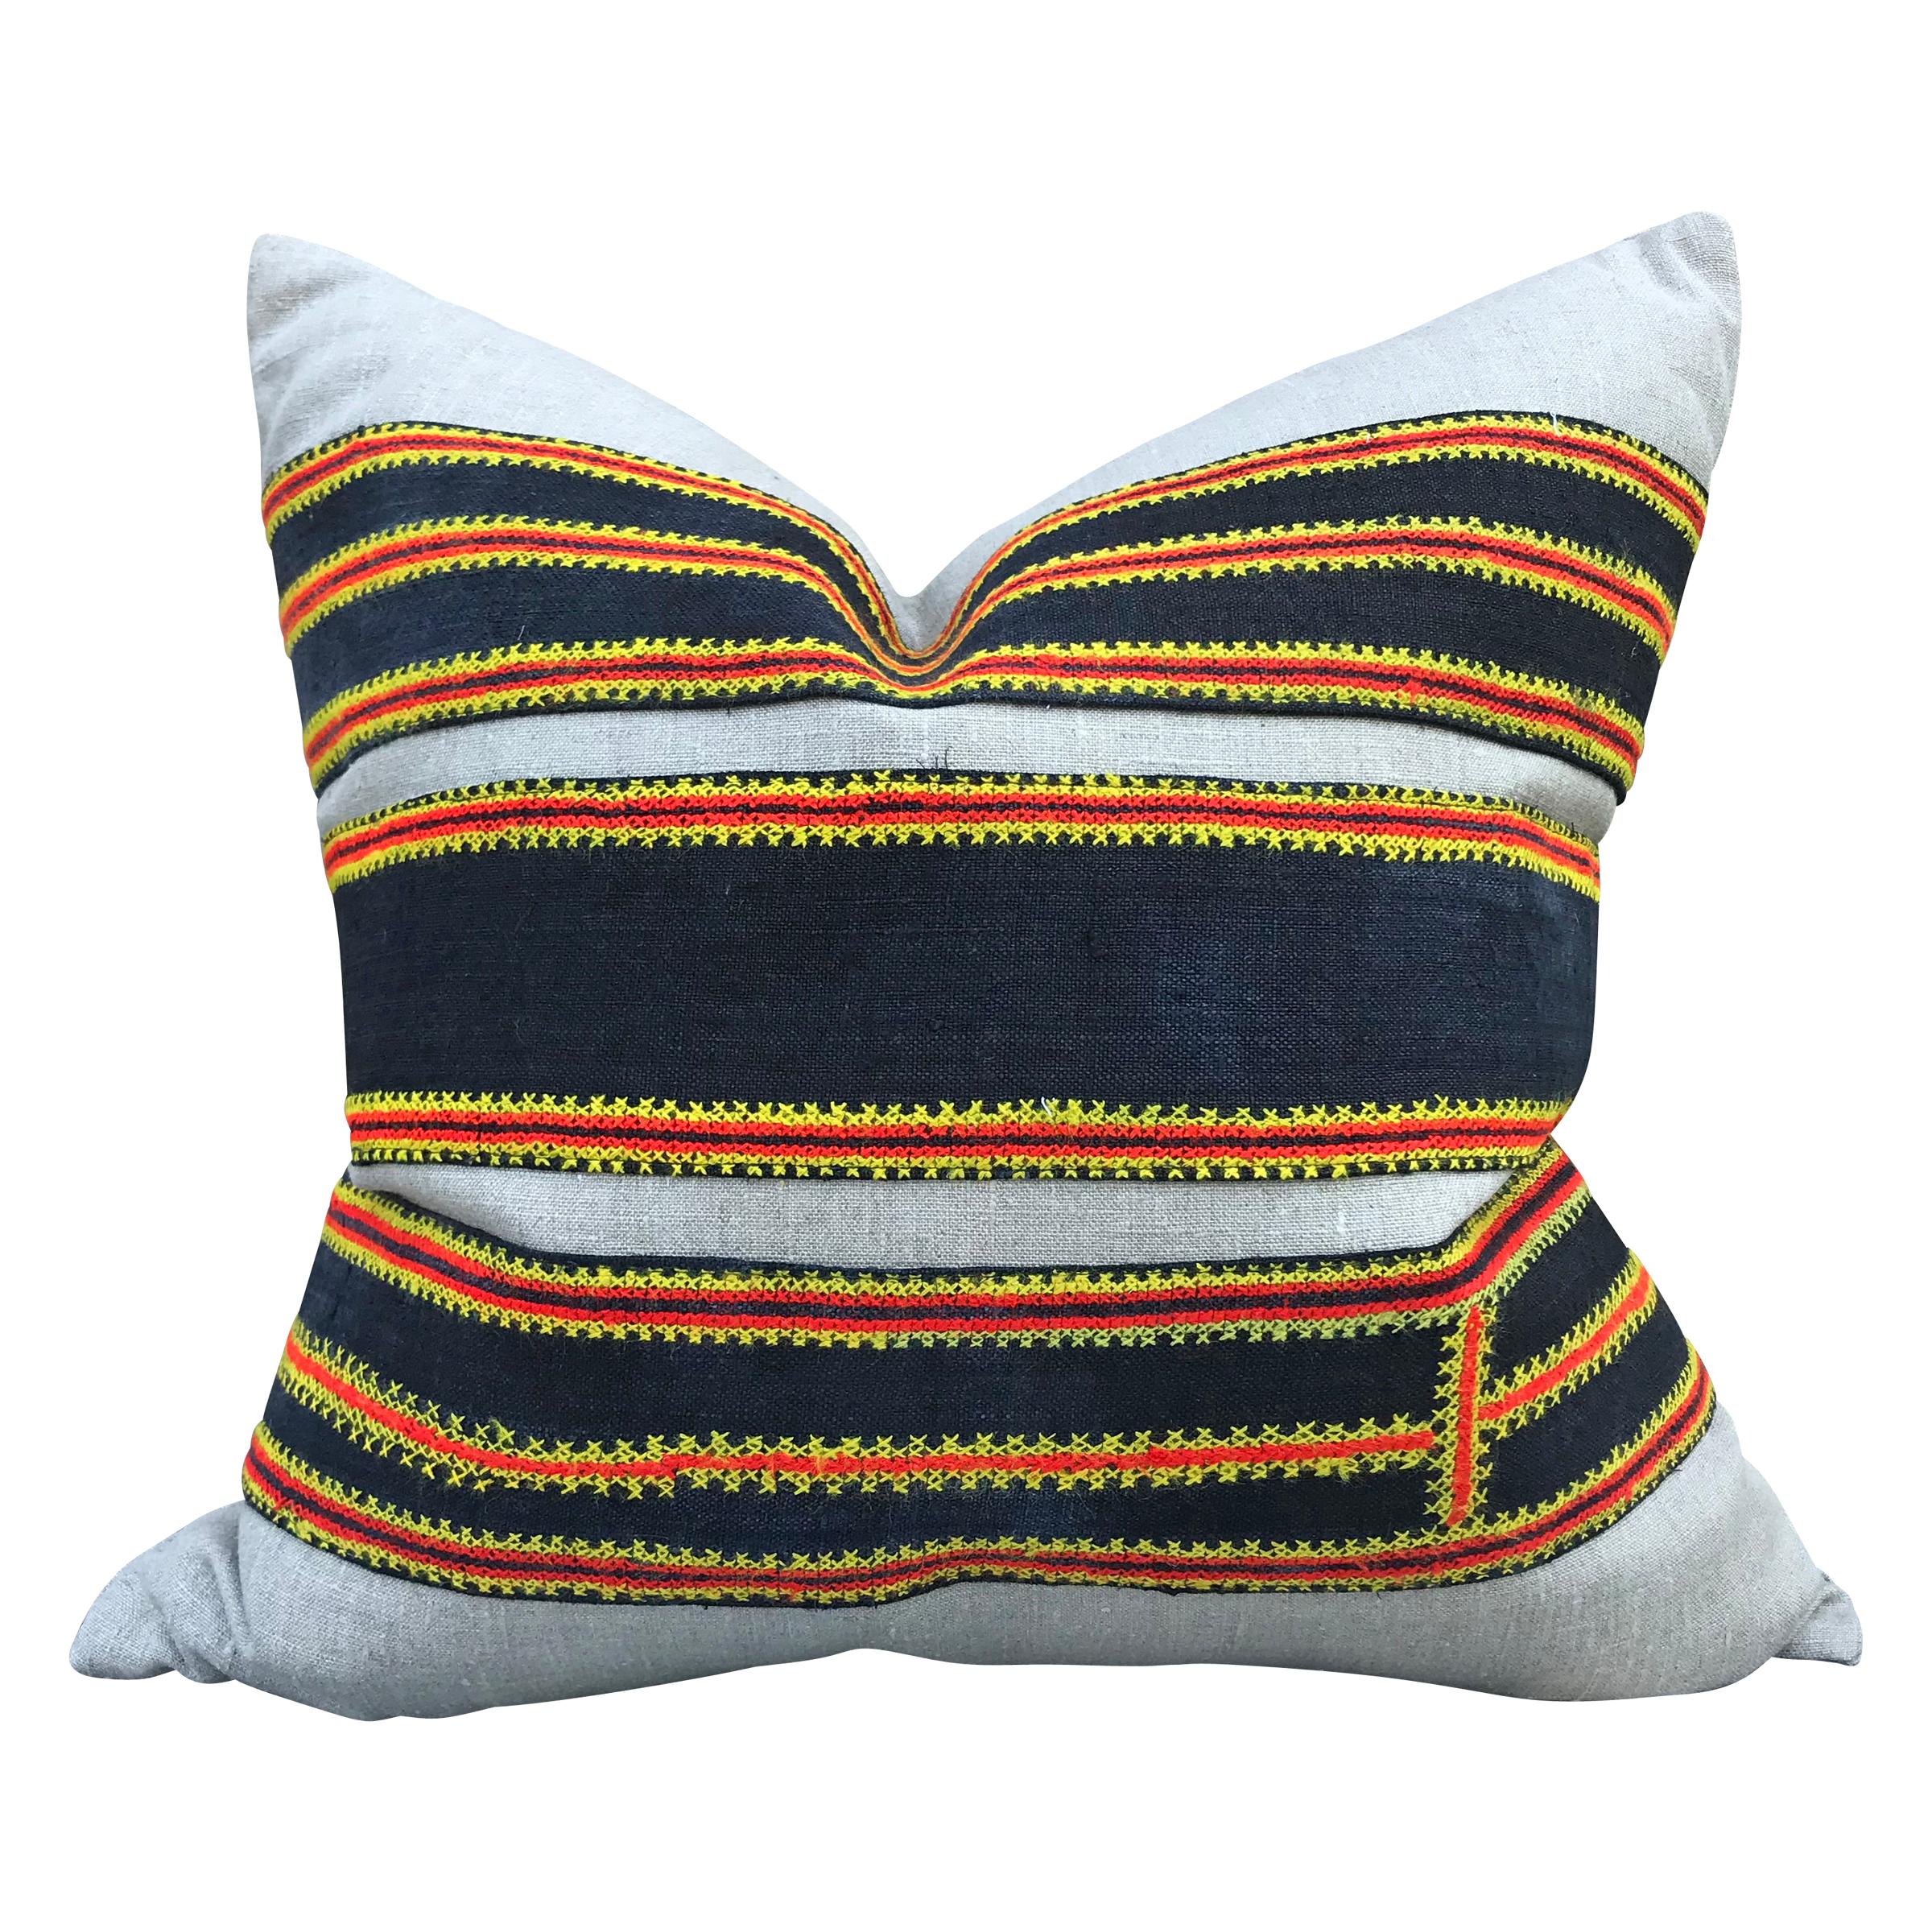 A pair of pillows made from vintage 20th century Hmong embroidered panels mounted to handwoven linen, and filled with down.